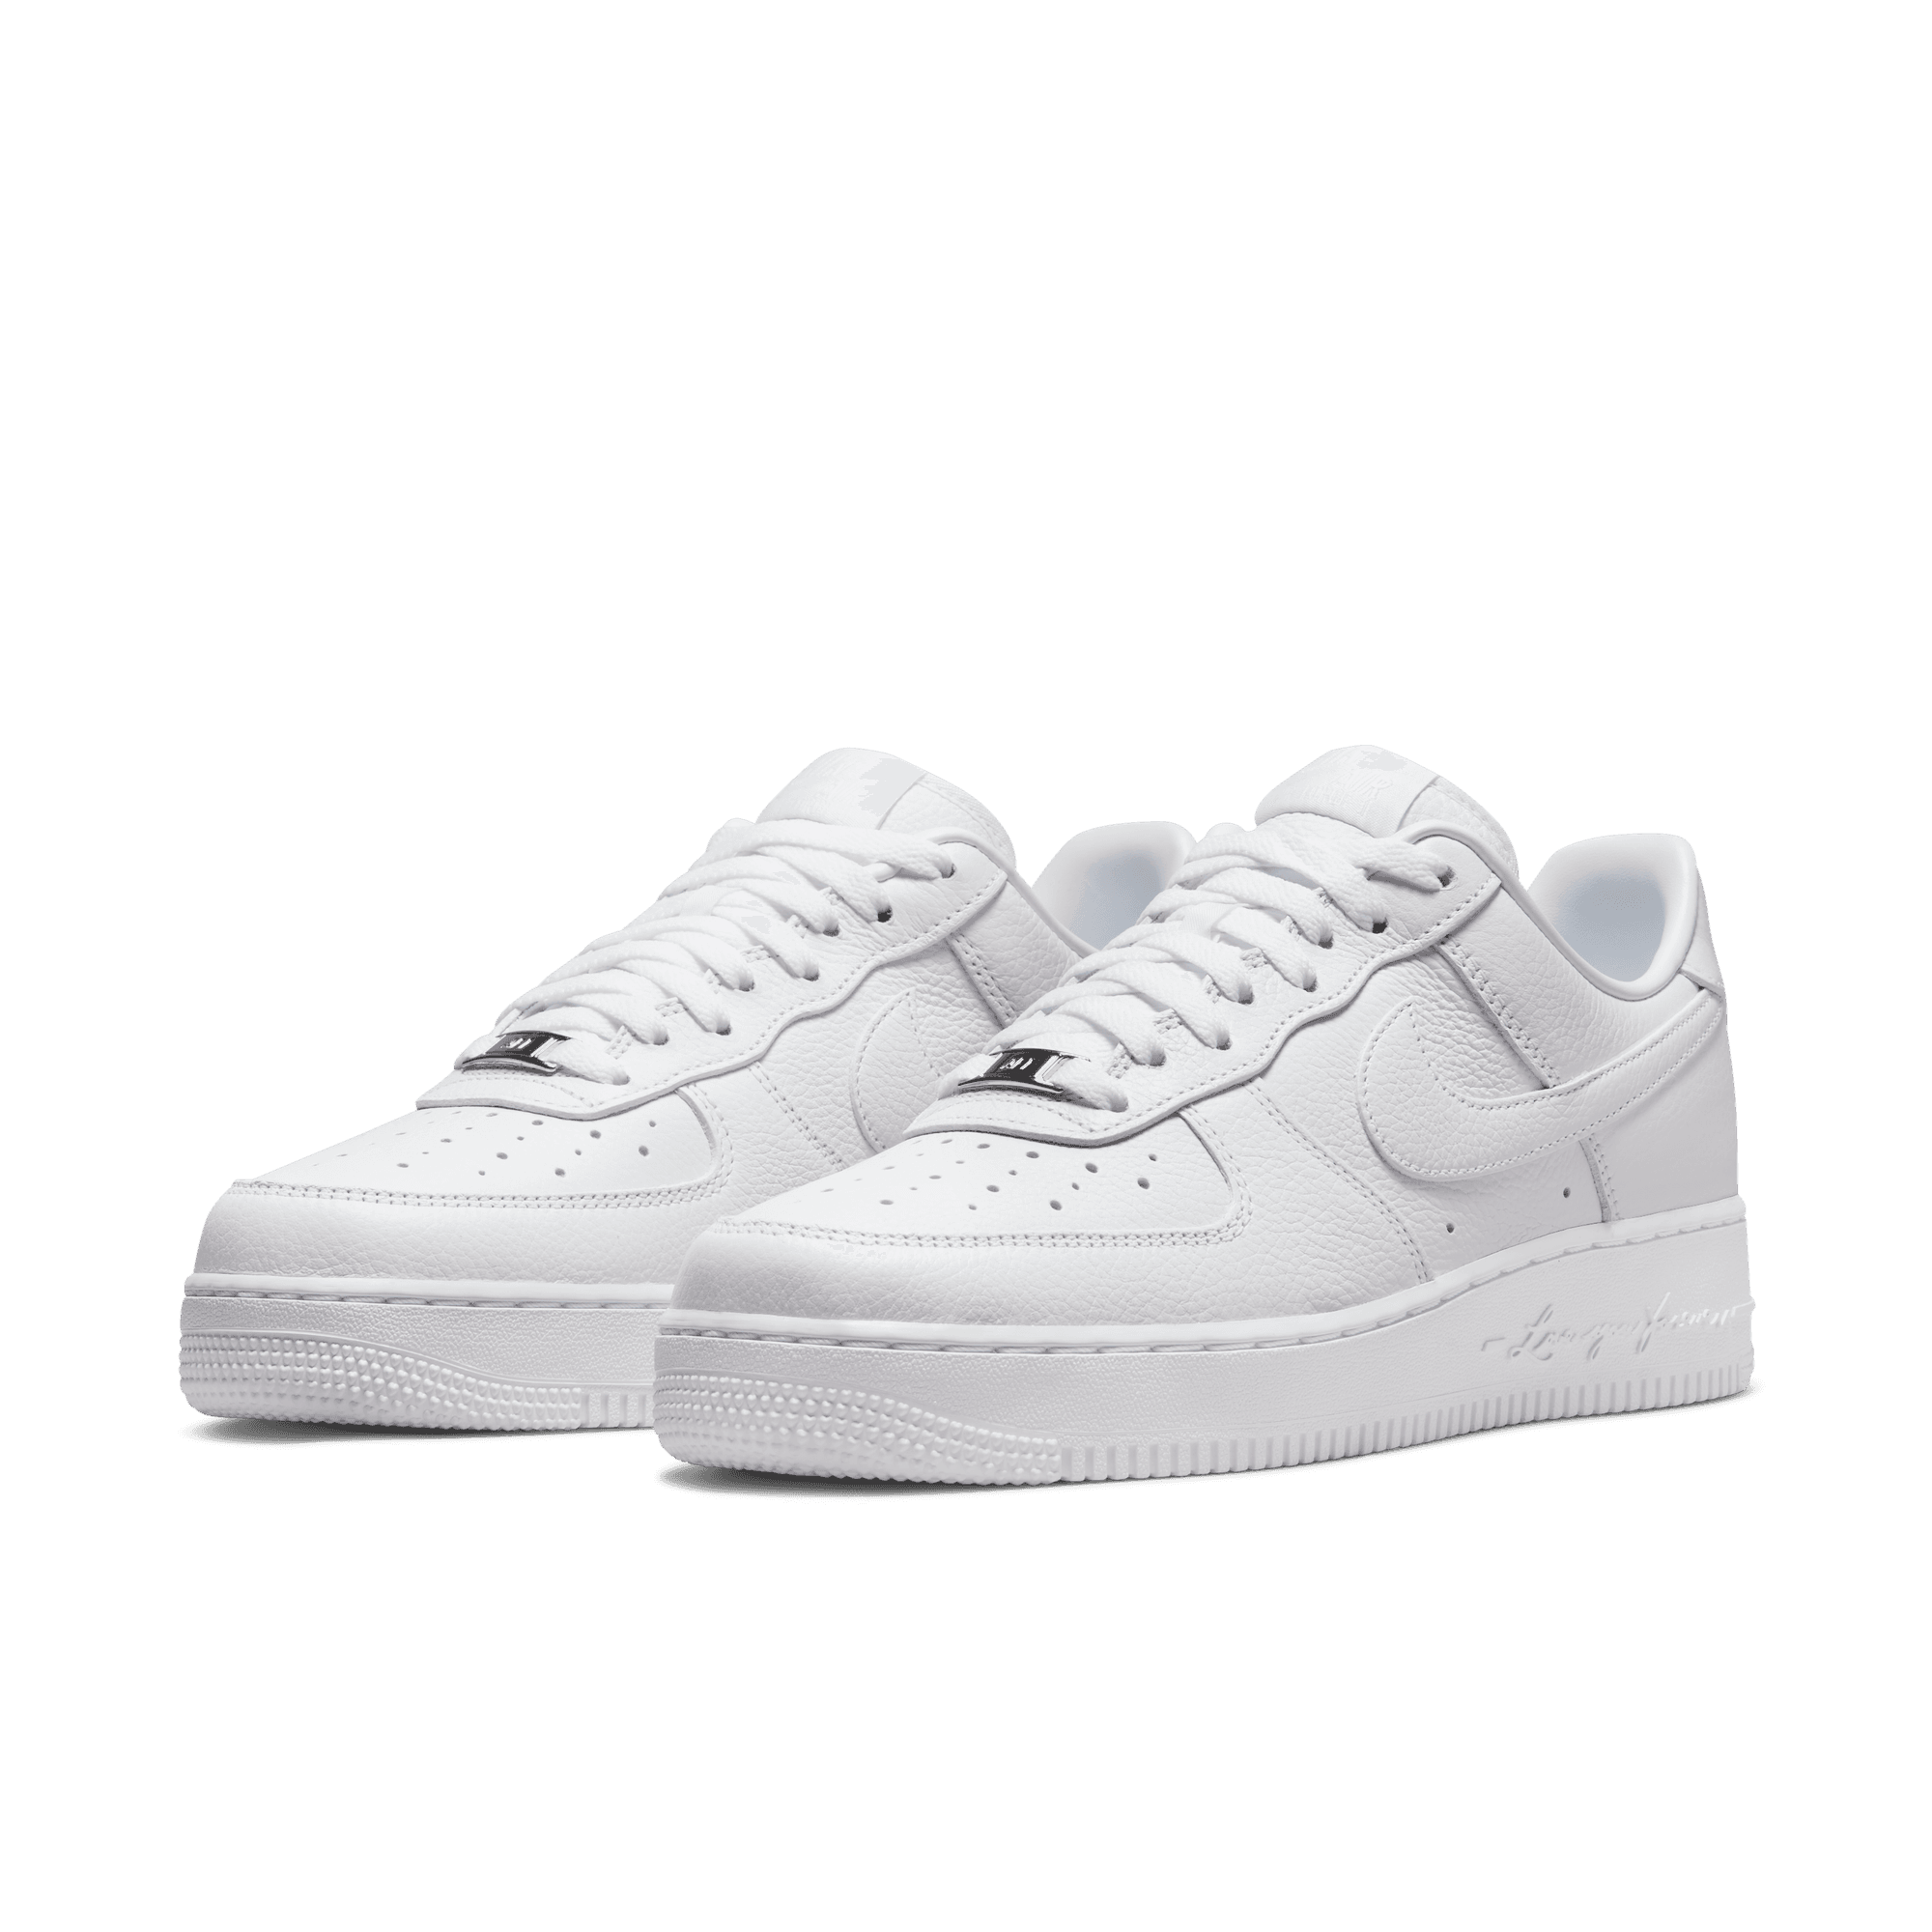 NOCTA X NIKE AIR FORCE 1 LOW "CERTIFIED LOVER BOY"